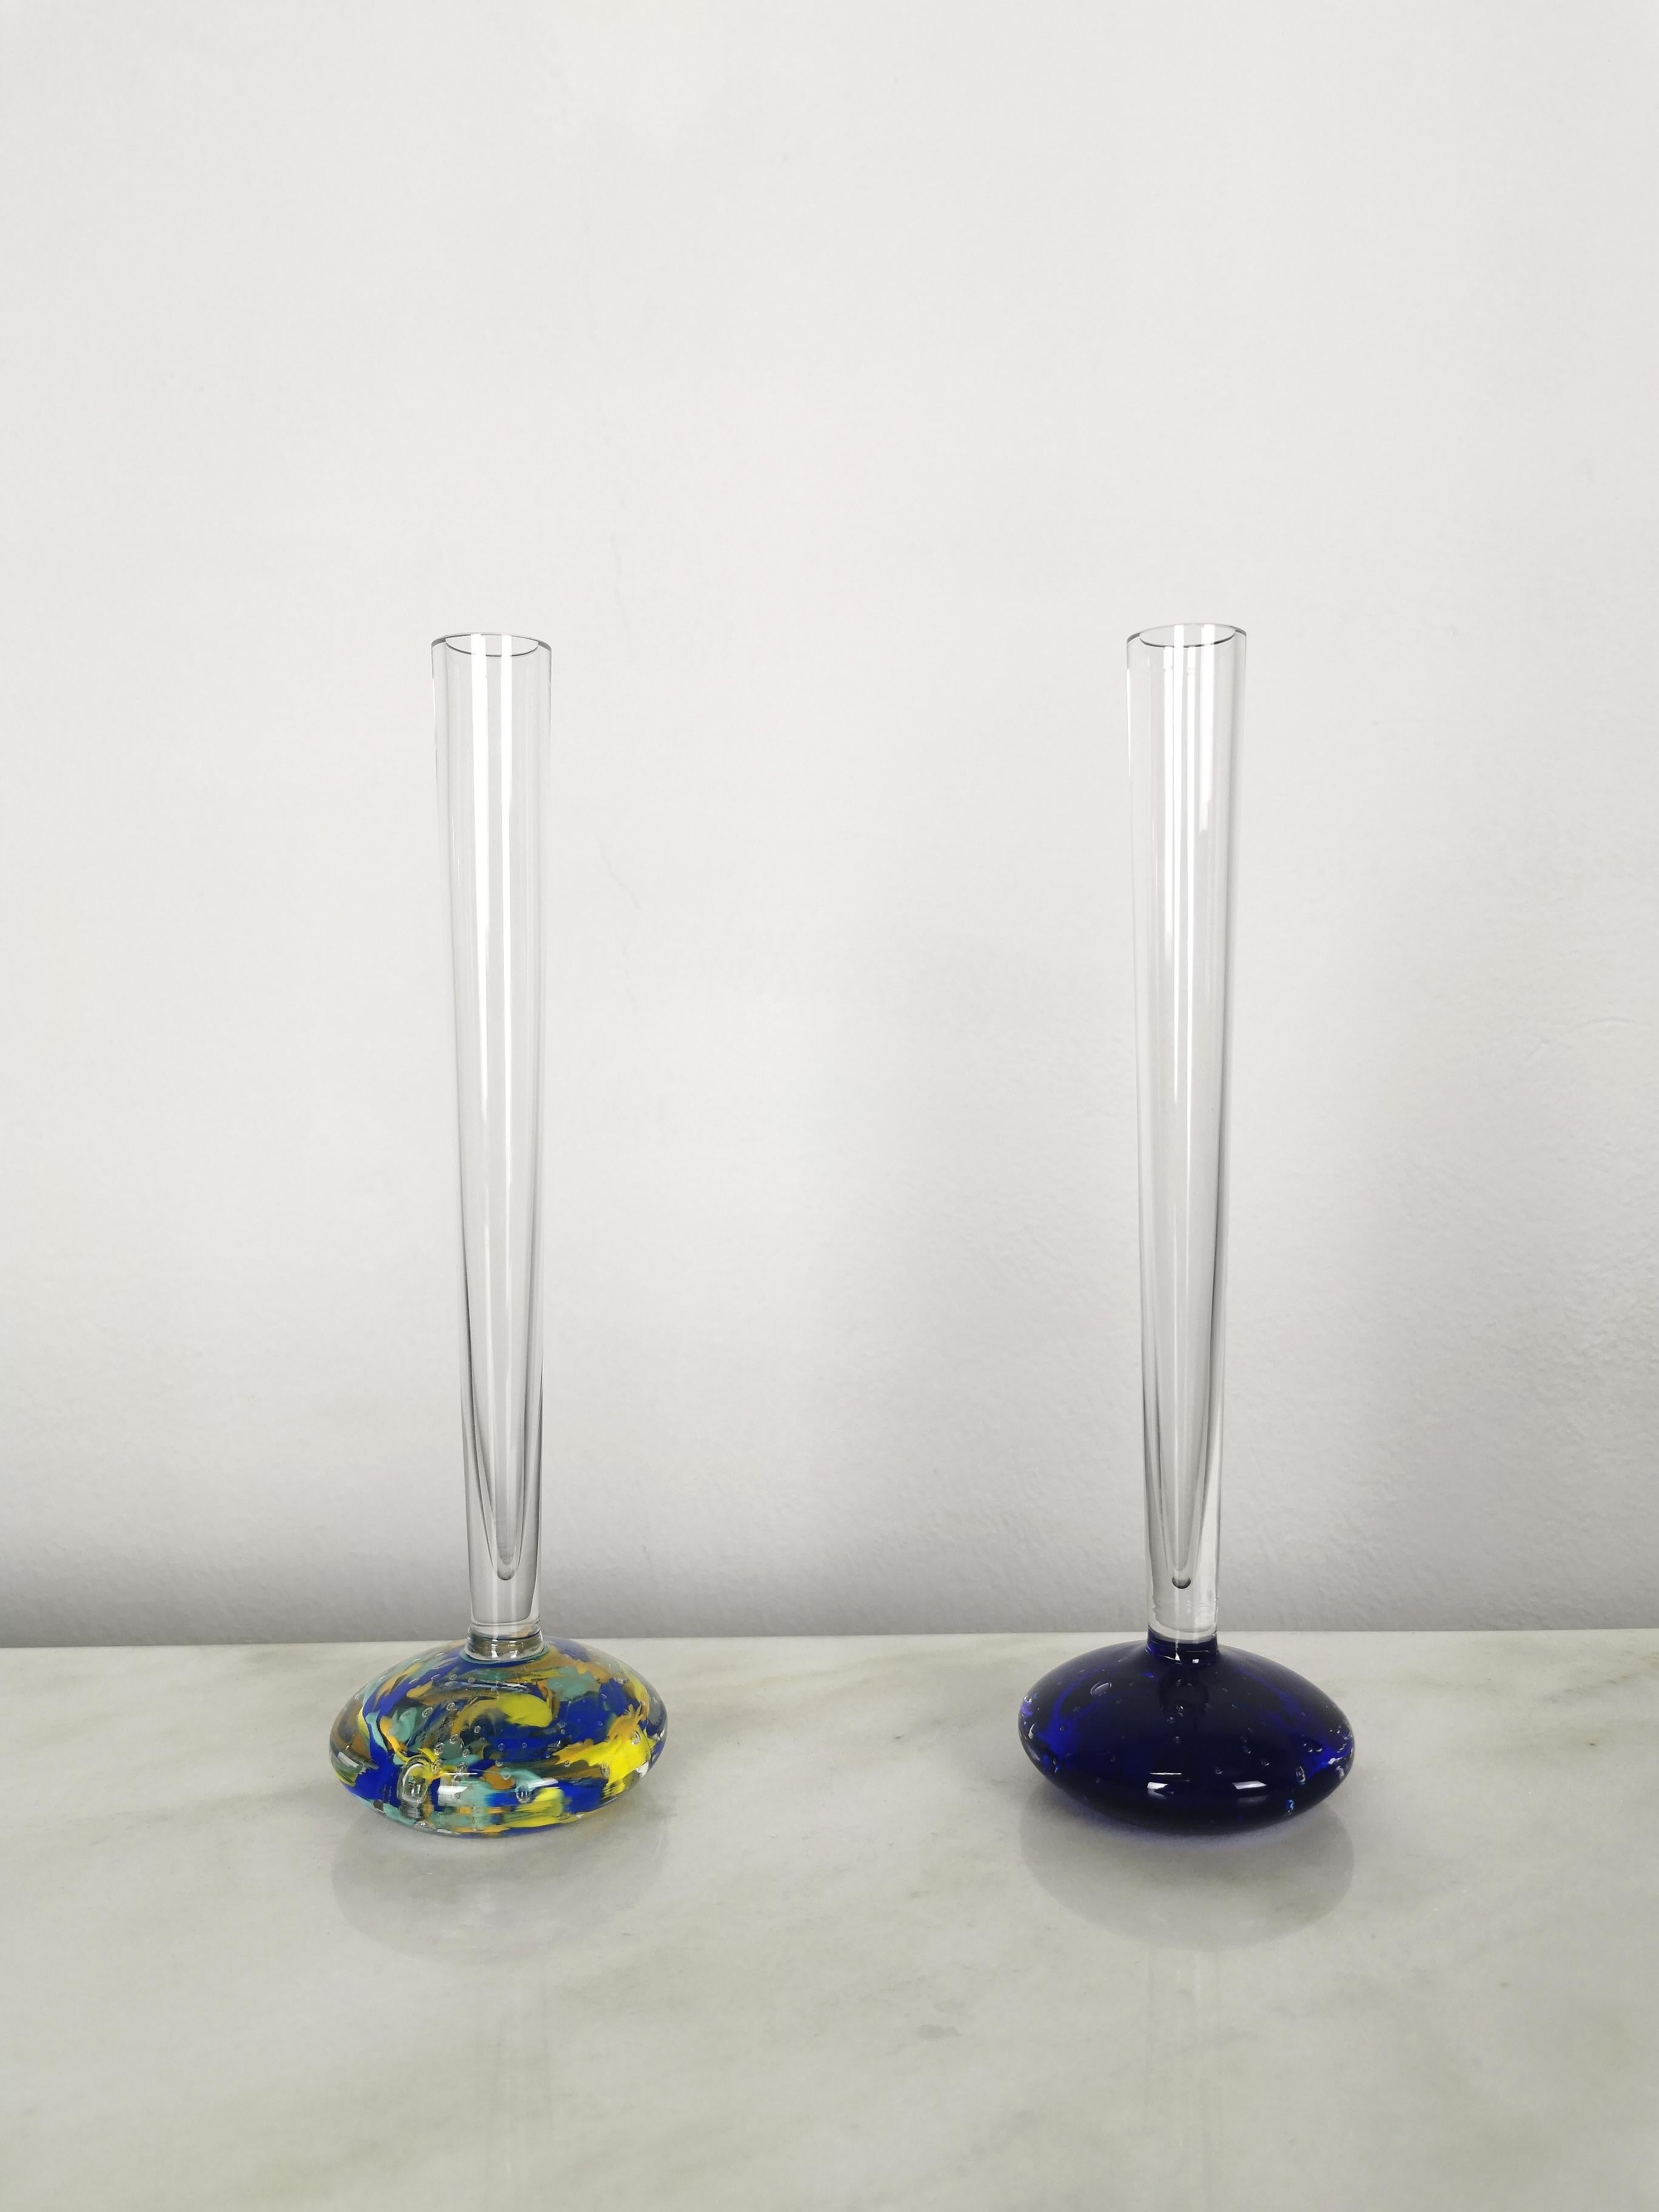 Set of 2 long neck vases produced in Italy in the 70s. Each single vase was made of transparent Murano glass and circular on the lower part with the famous sommerso and bullicante techniques, which together create a particular combination of vibrant